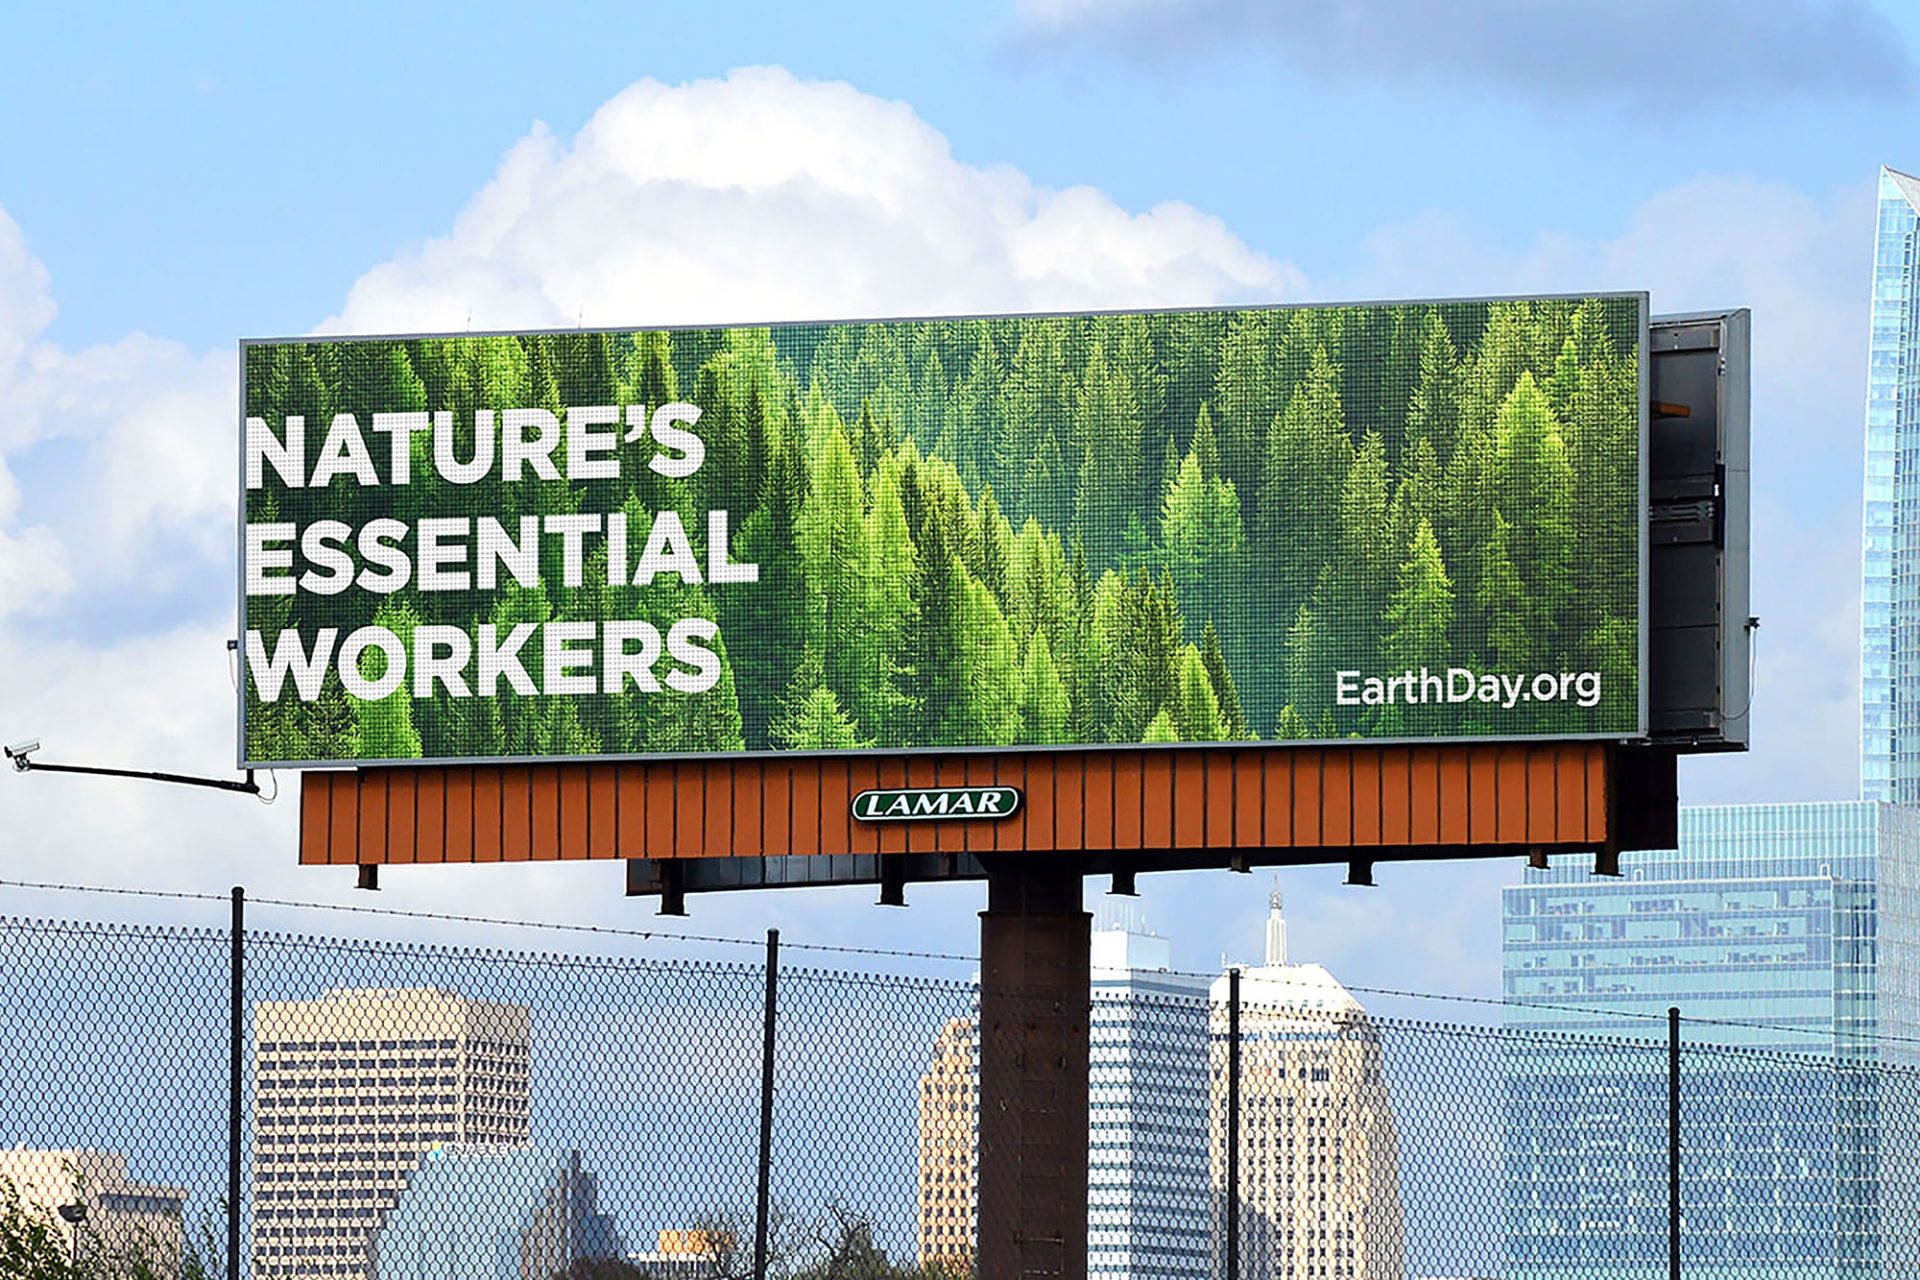 Out of home bulletin for Earthday.org showing trees and headline "nature's essential workers"